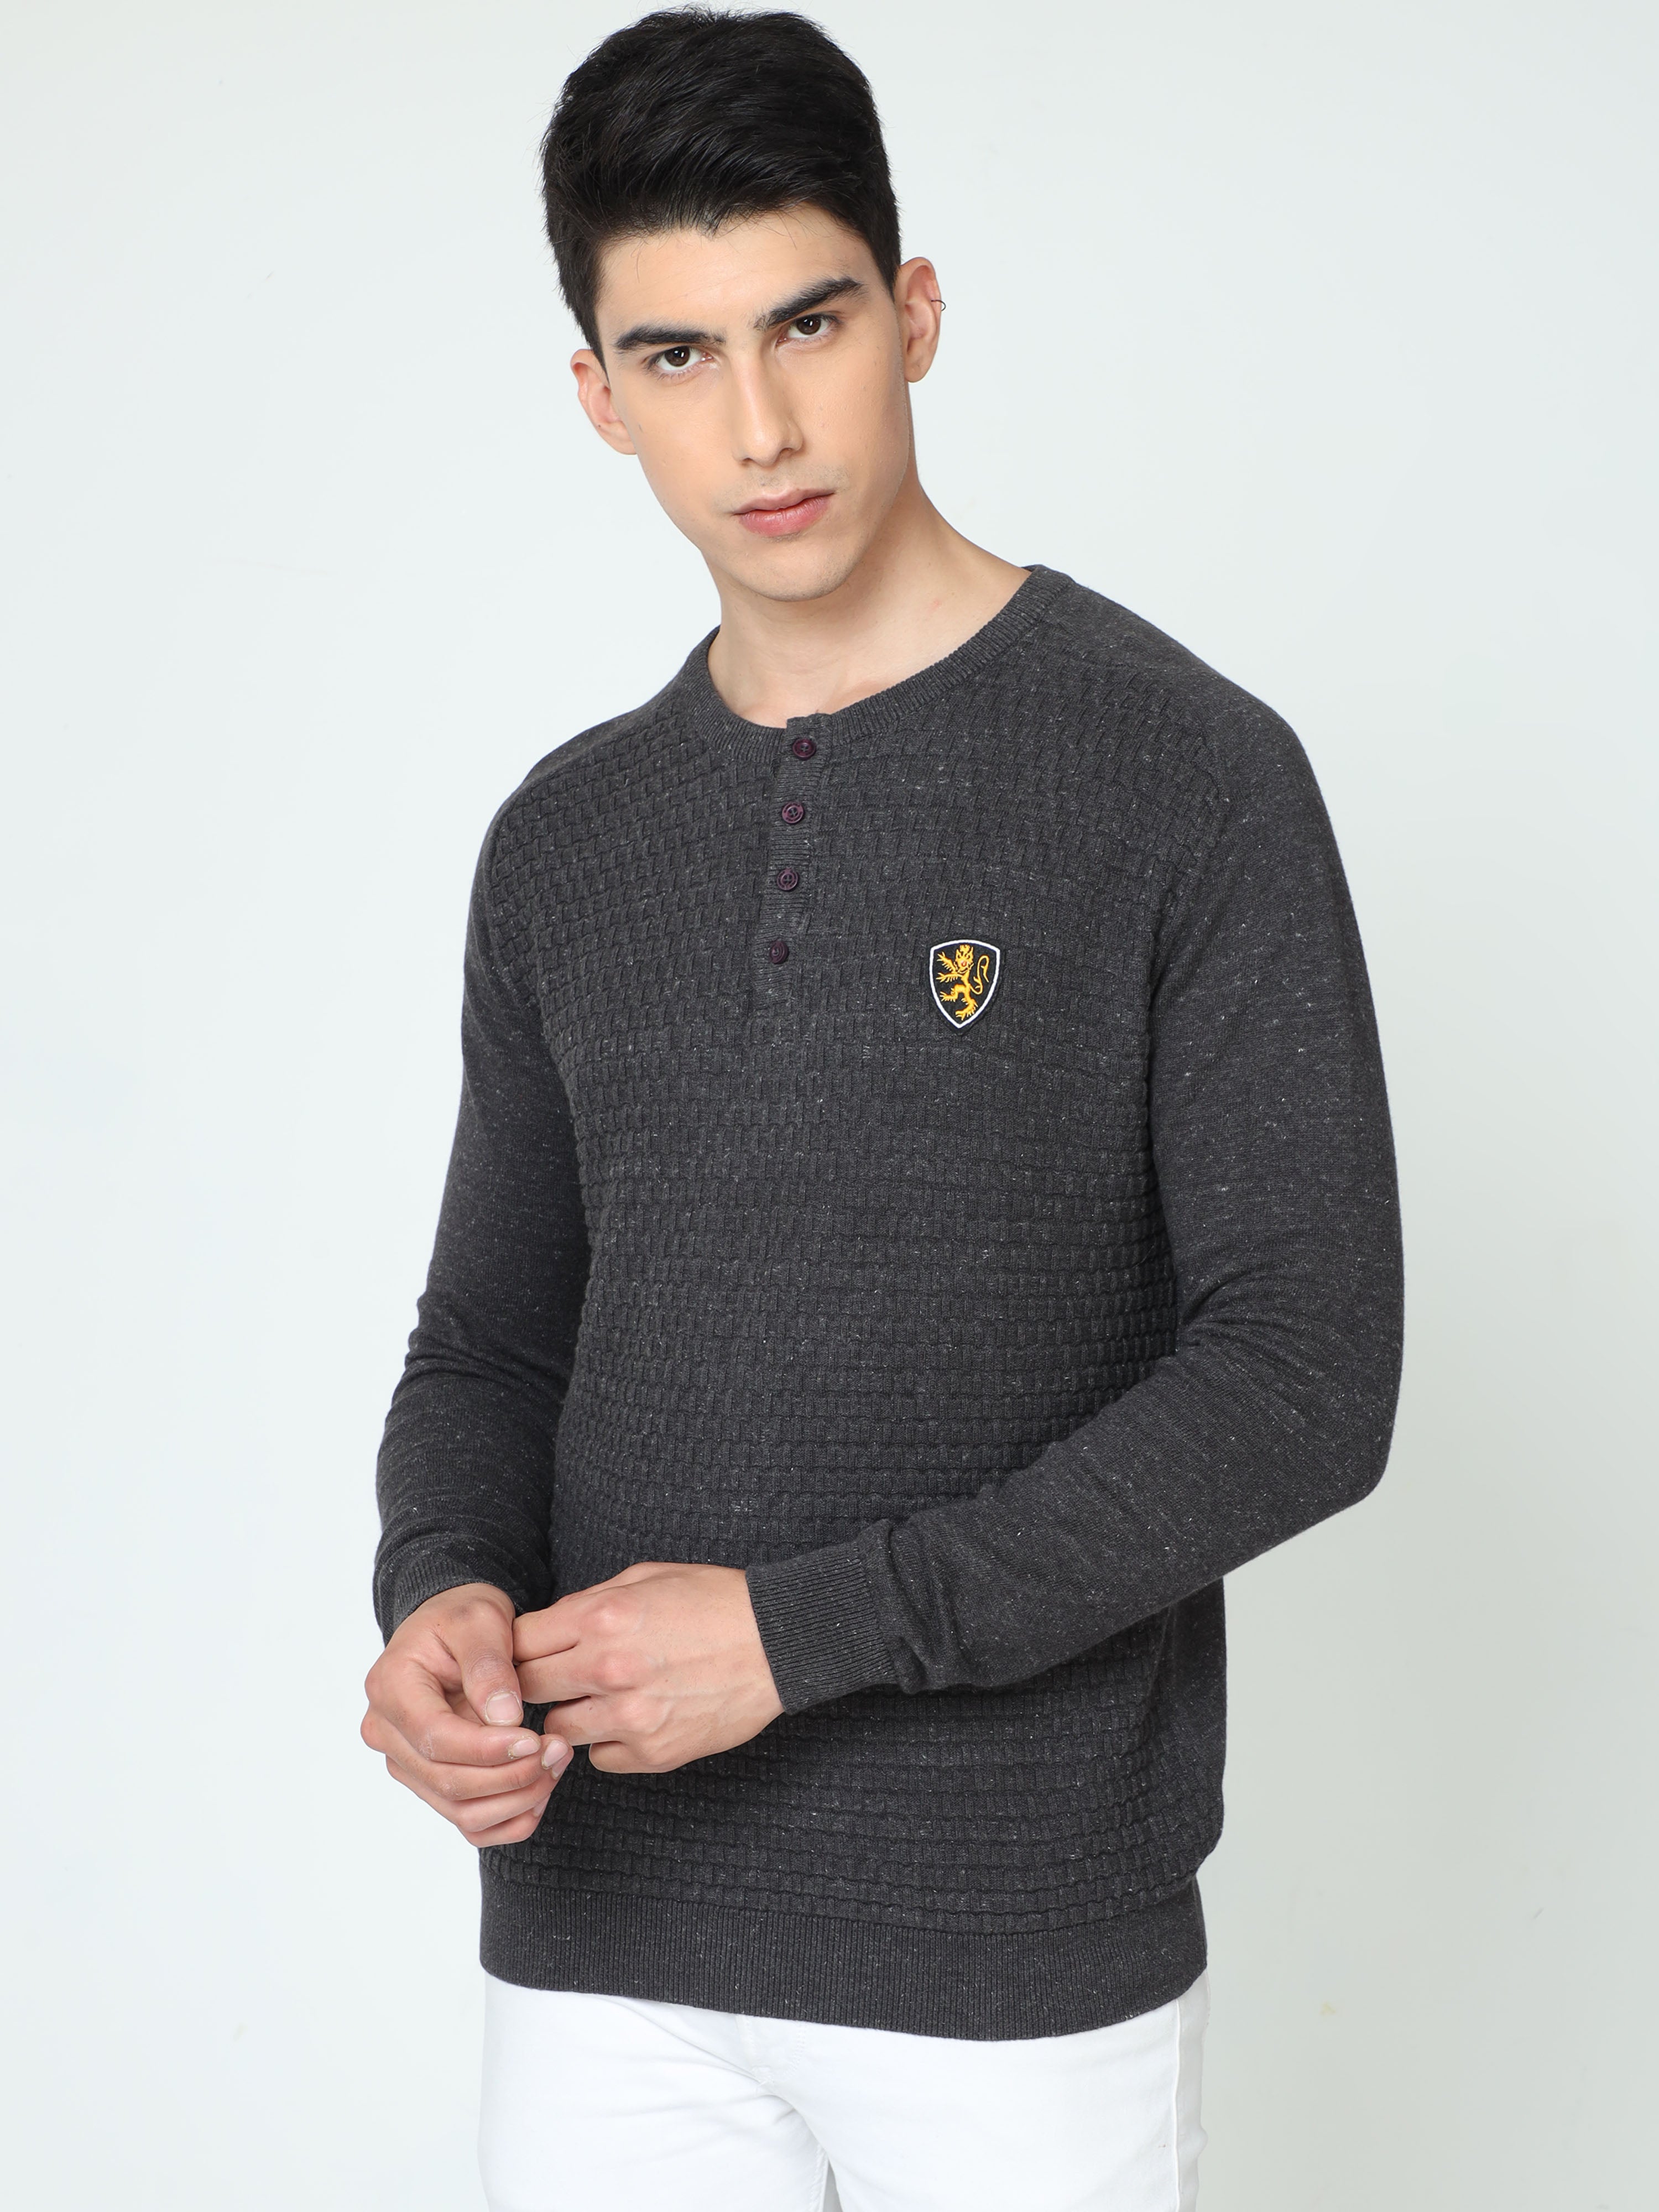 Classic Polo Mens 100% Cotton Black Solid Crew Neck Full Sleeves Slim Fit Sweater |Cp-Swt-01